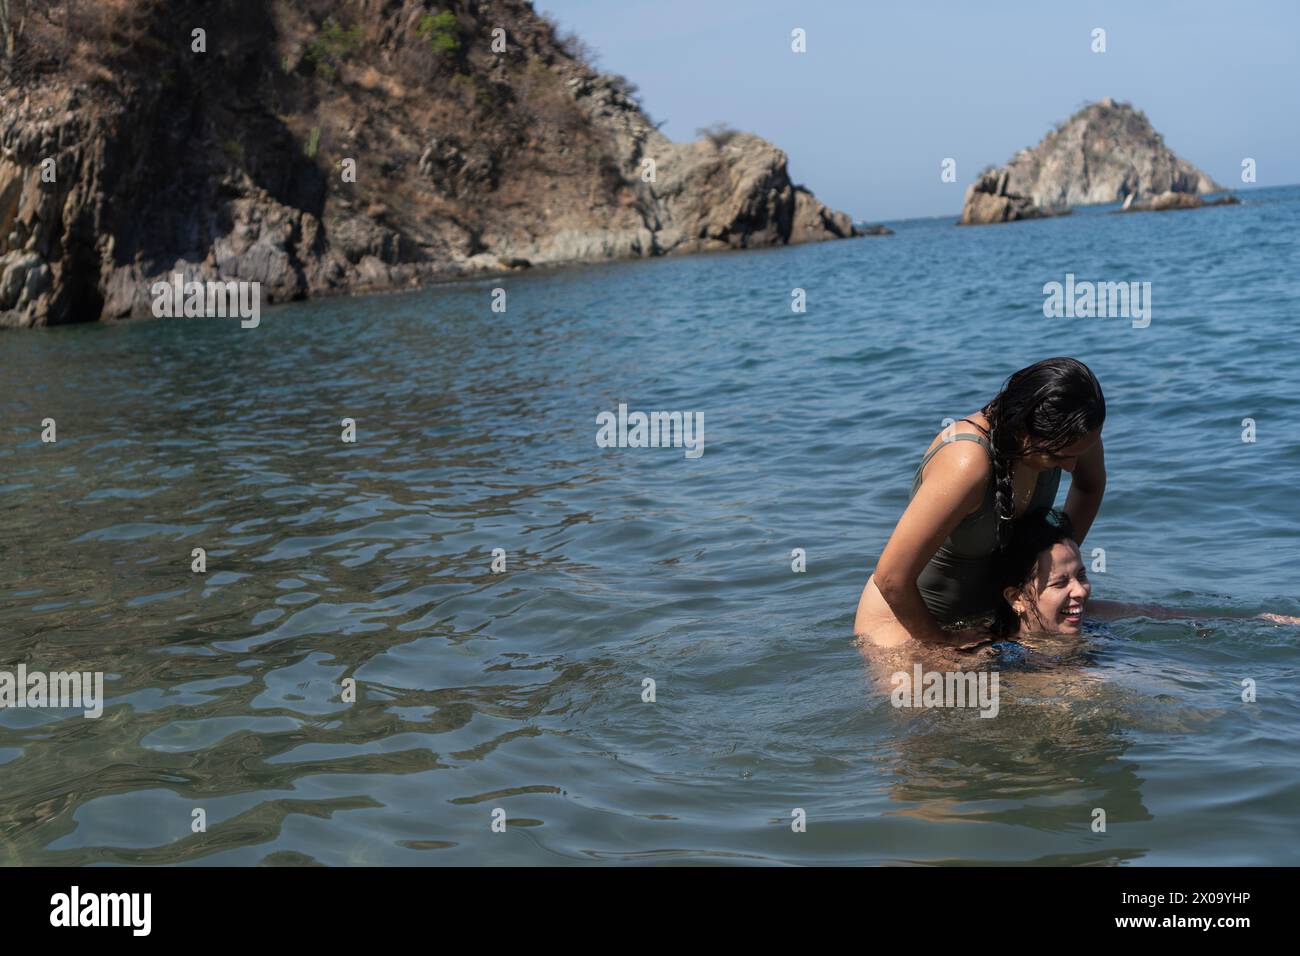 Two individuals enjoying playful times in coastal waters. Stock Photo